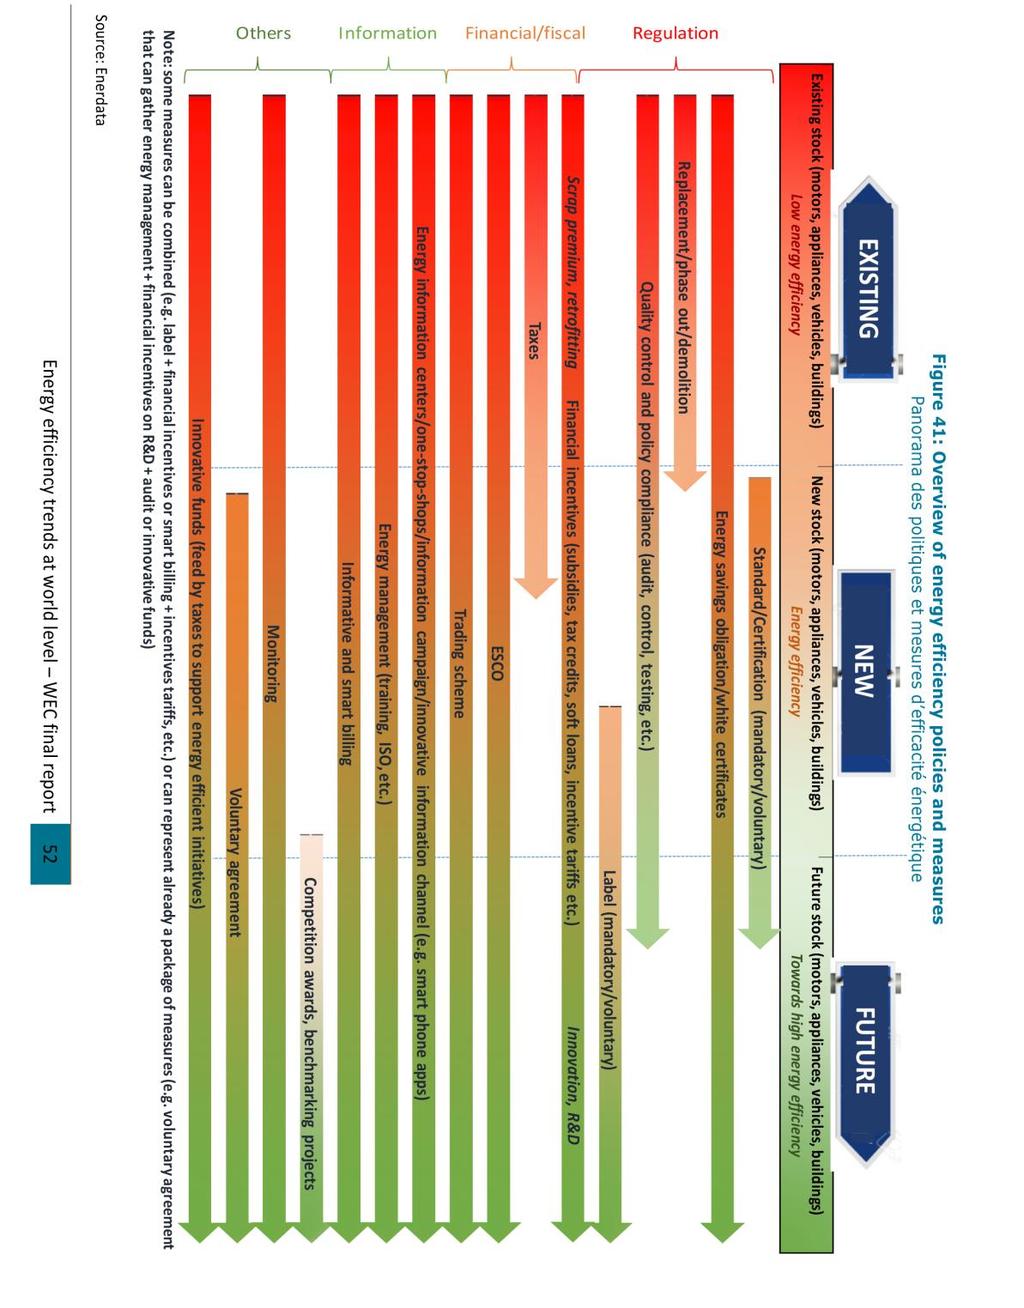 WORLD ENERGY COUNCIL ENERGY EFFICIENCY A STRAIGHT PATH FIGURE 41: OVERVIEW OF ENERGY EFFICIENCY